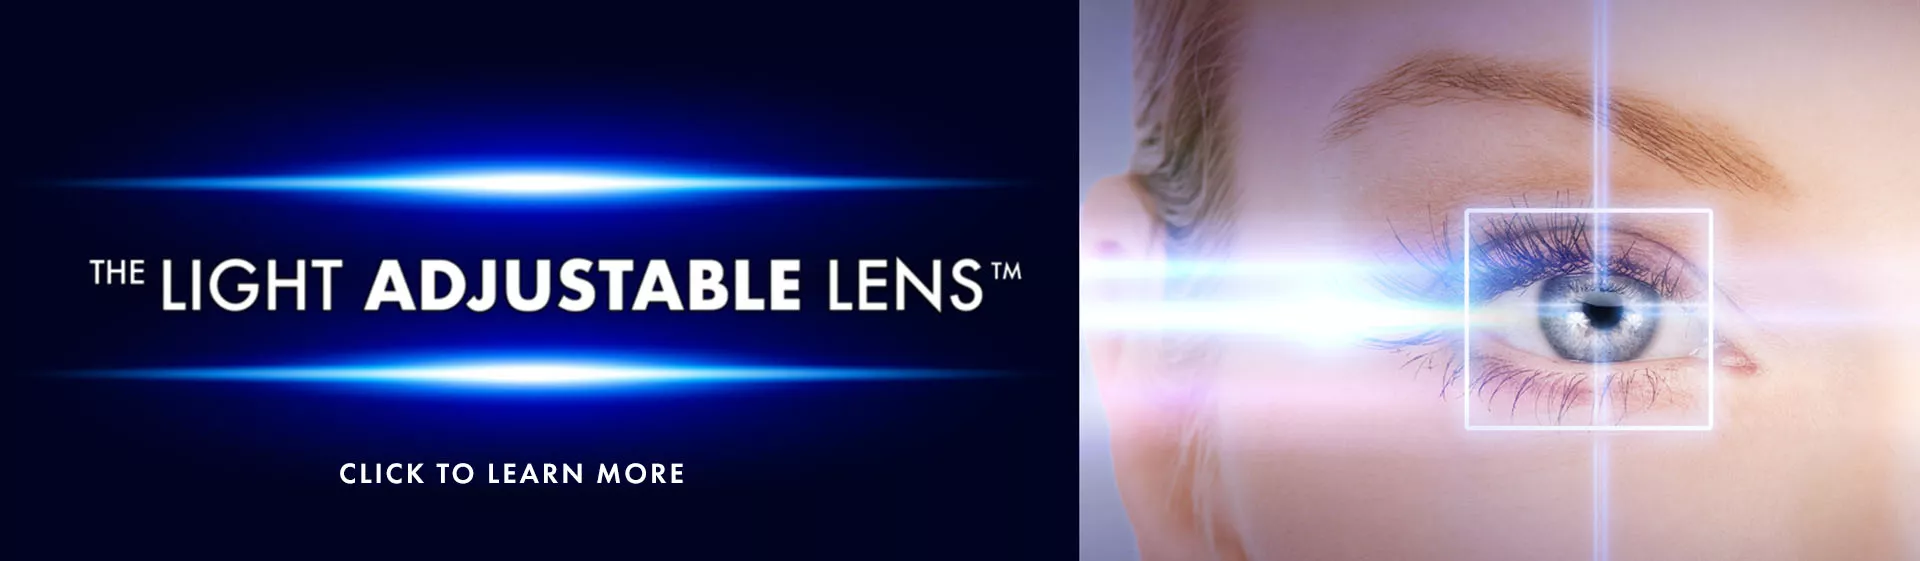 The Light Adjustable Lens: Click to learn more